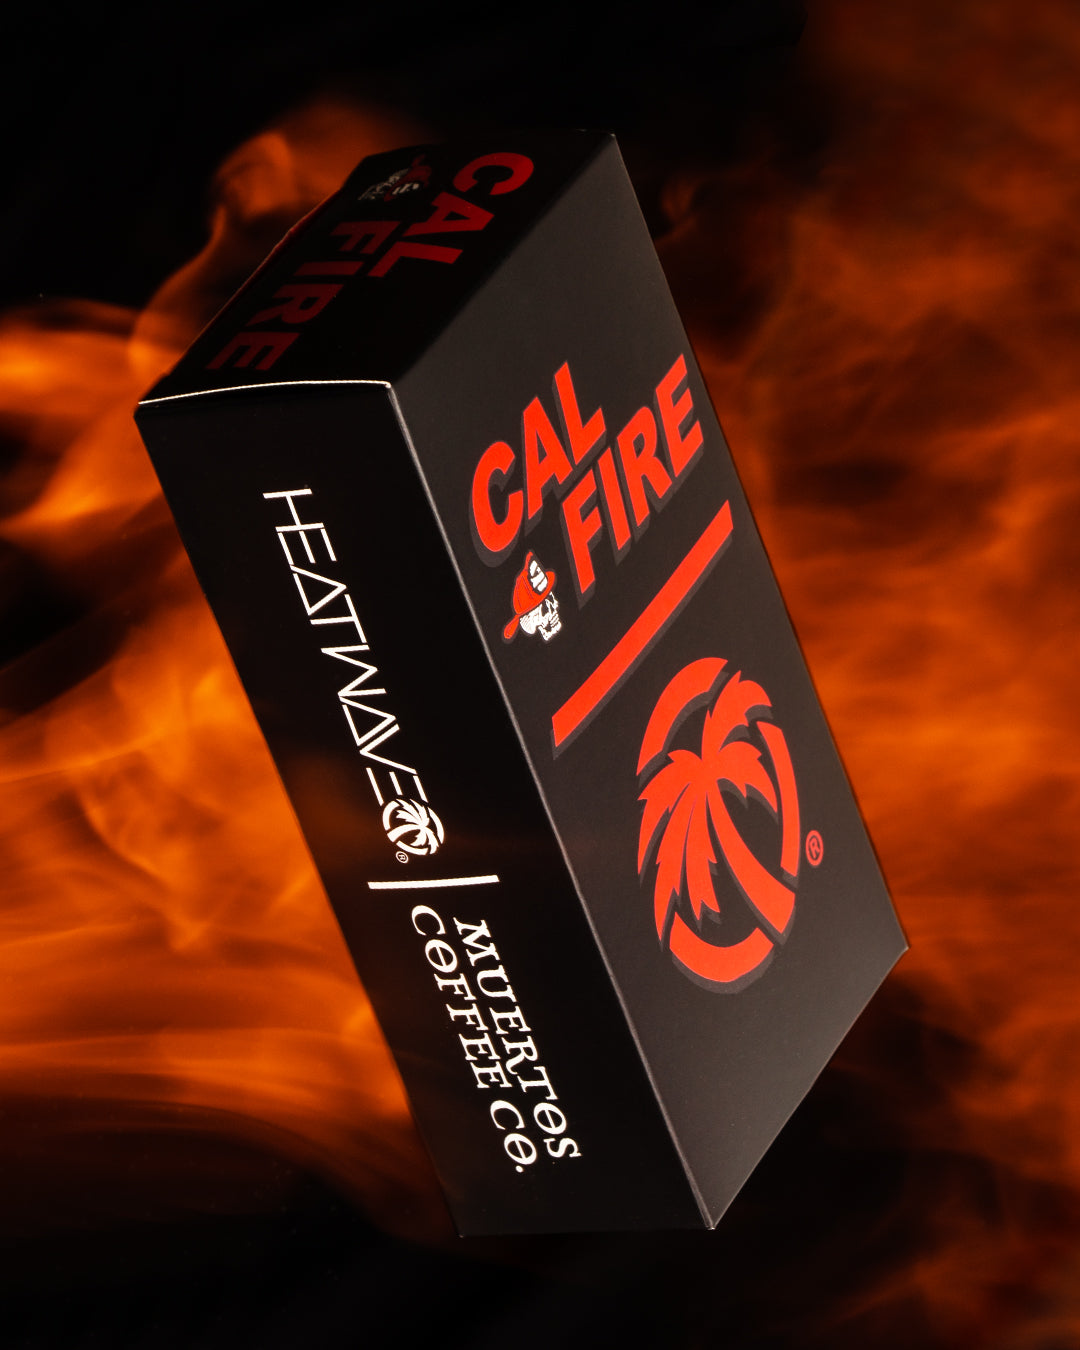 Heat Wave Visual Cal Fire Lazer Face Sunglasses box engulfed in flames.